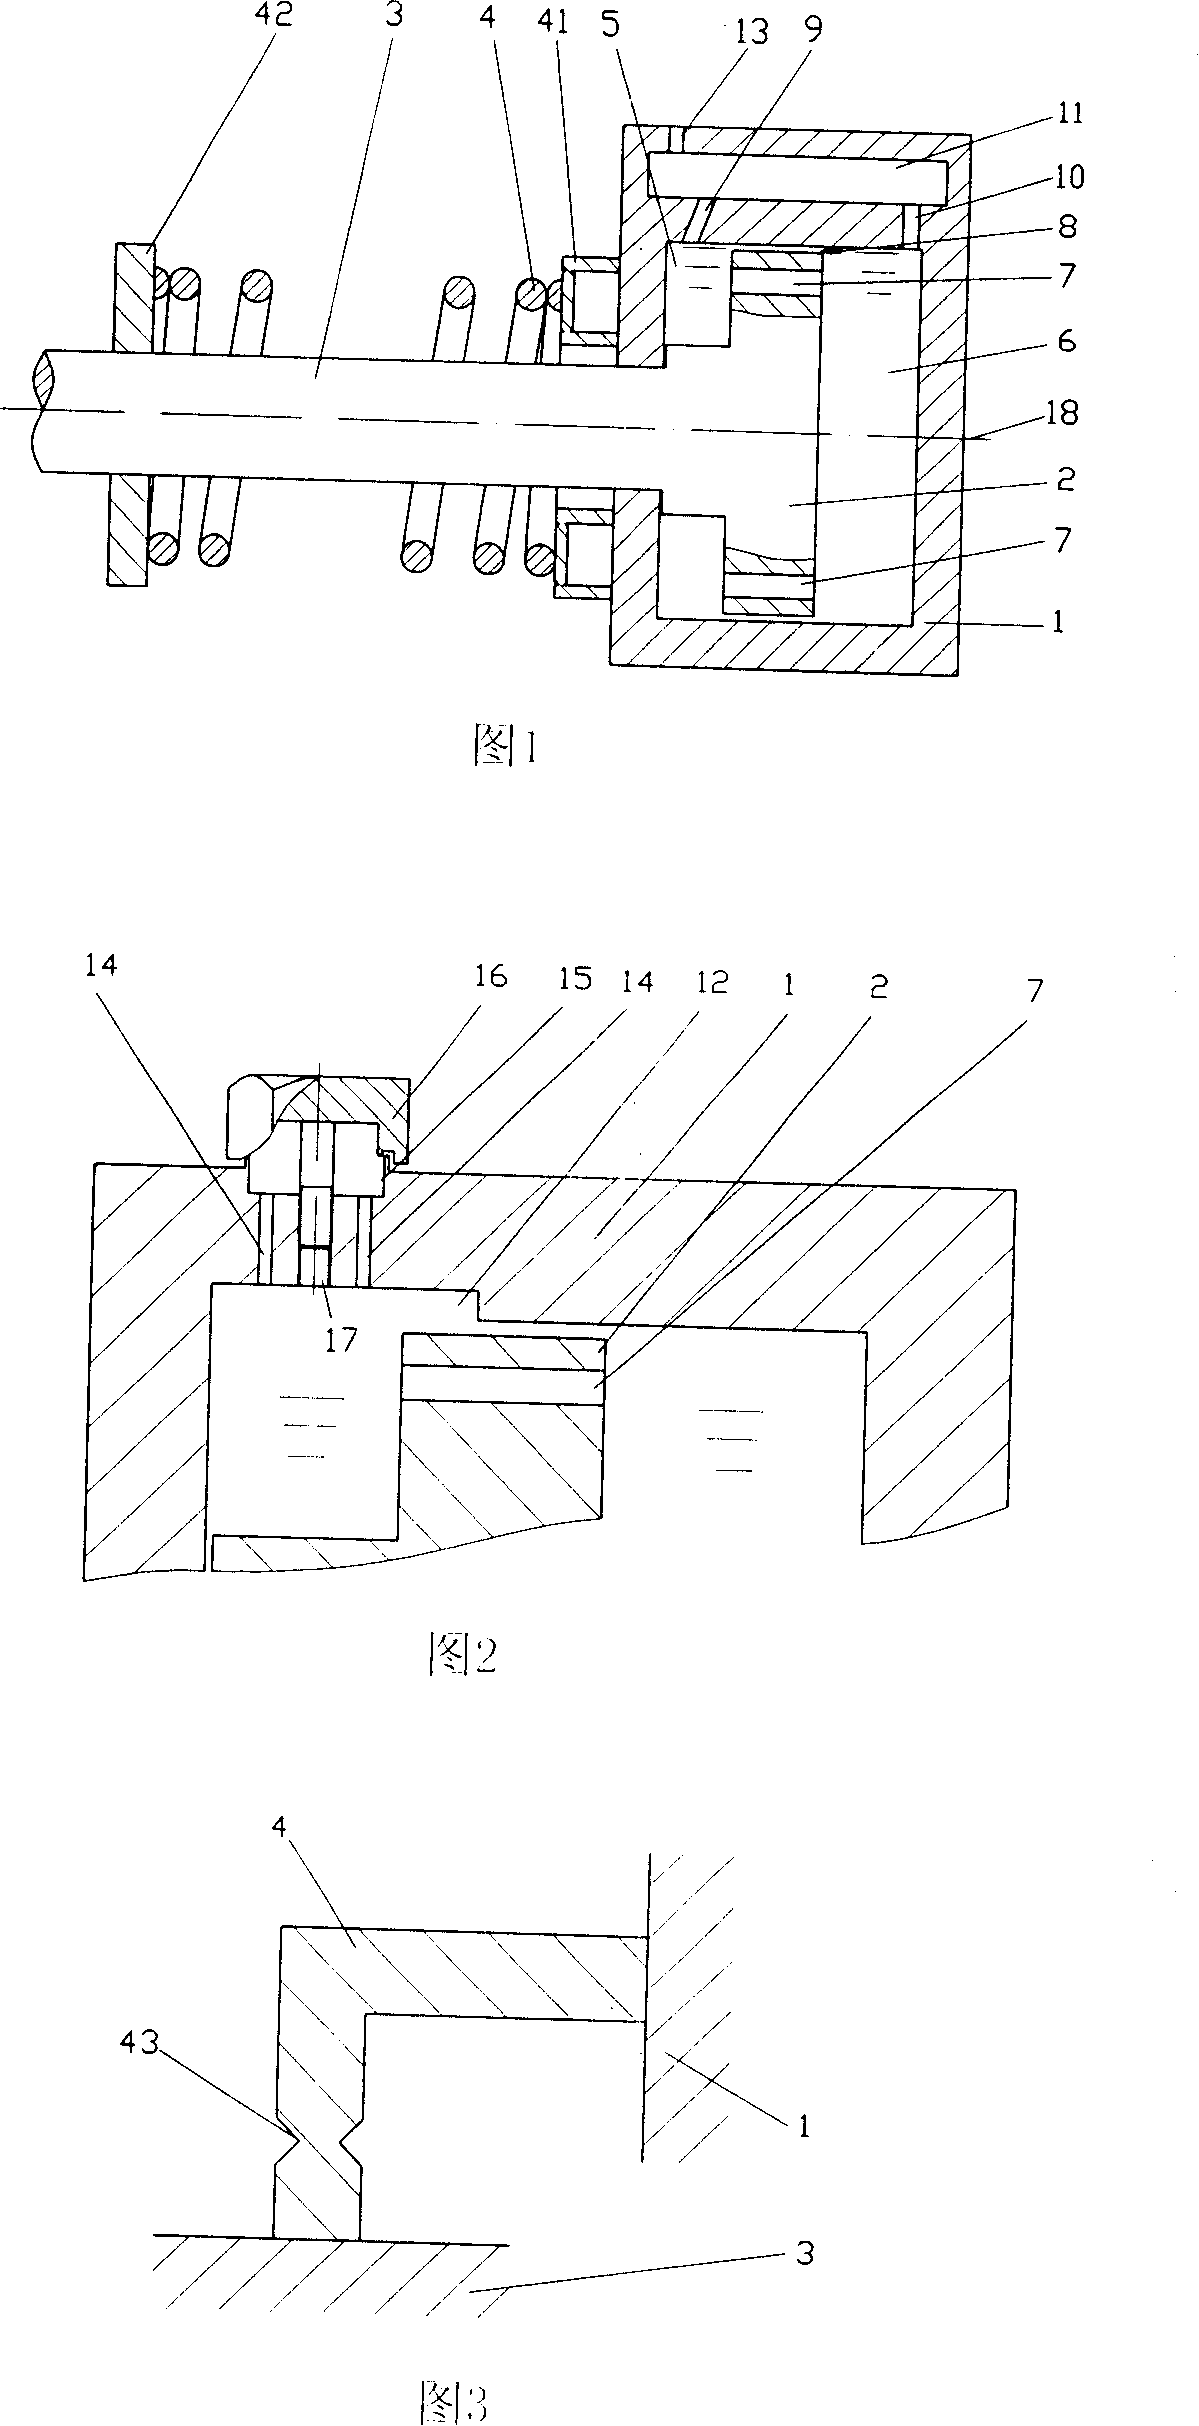 Hydraulic buffering device when automobile being bounced